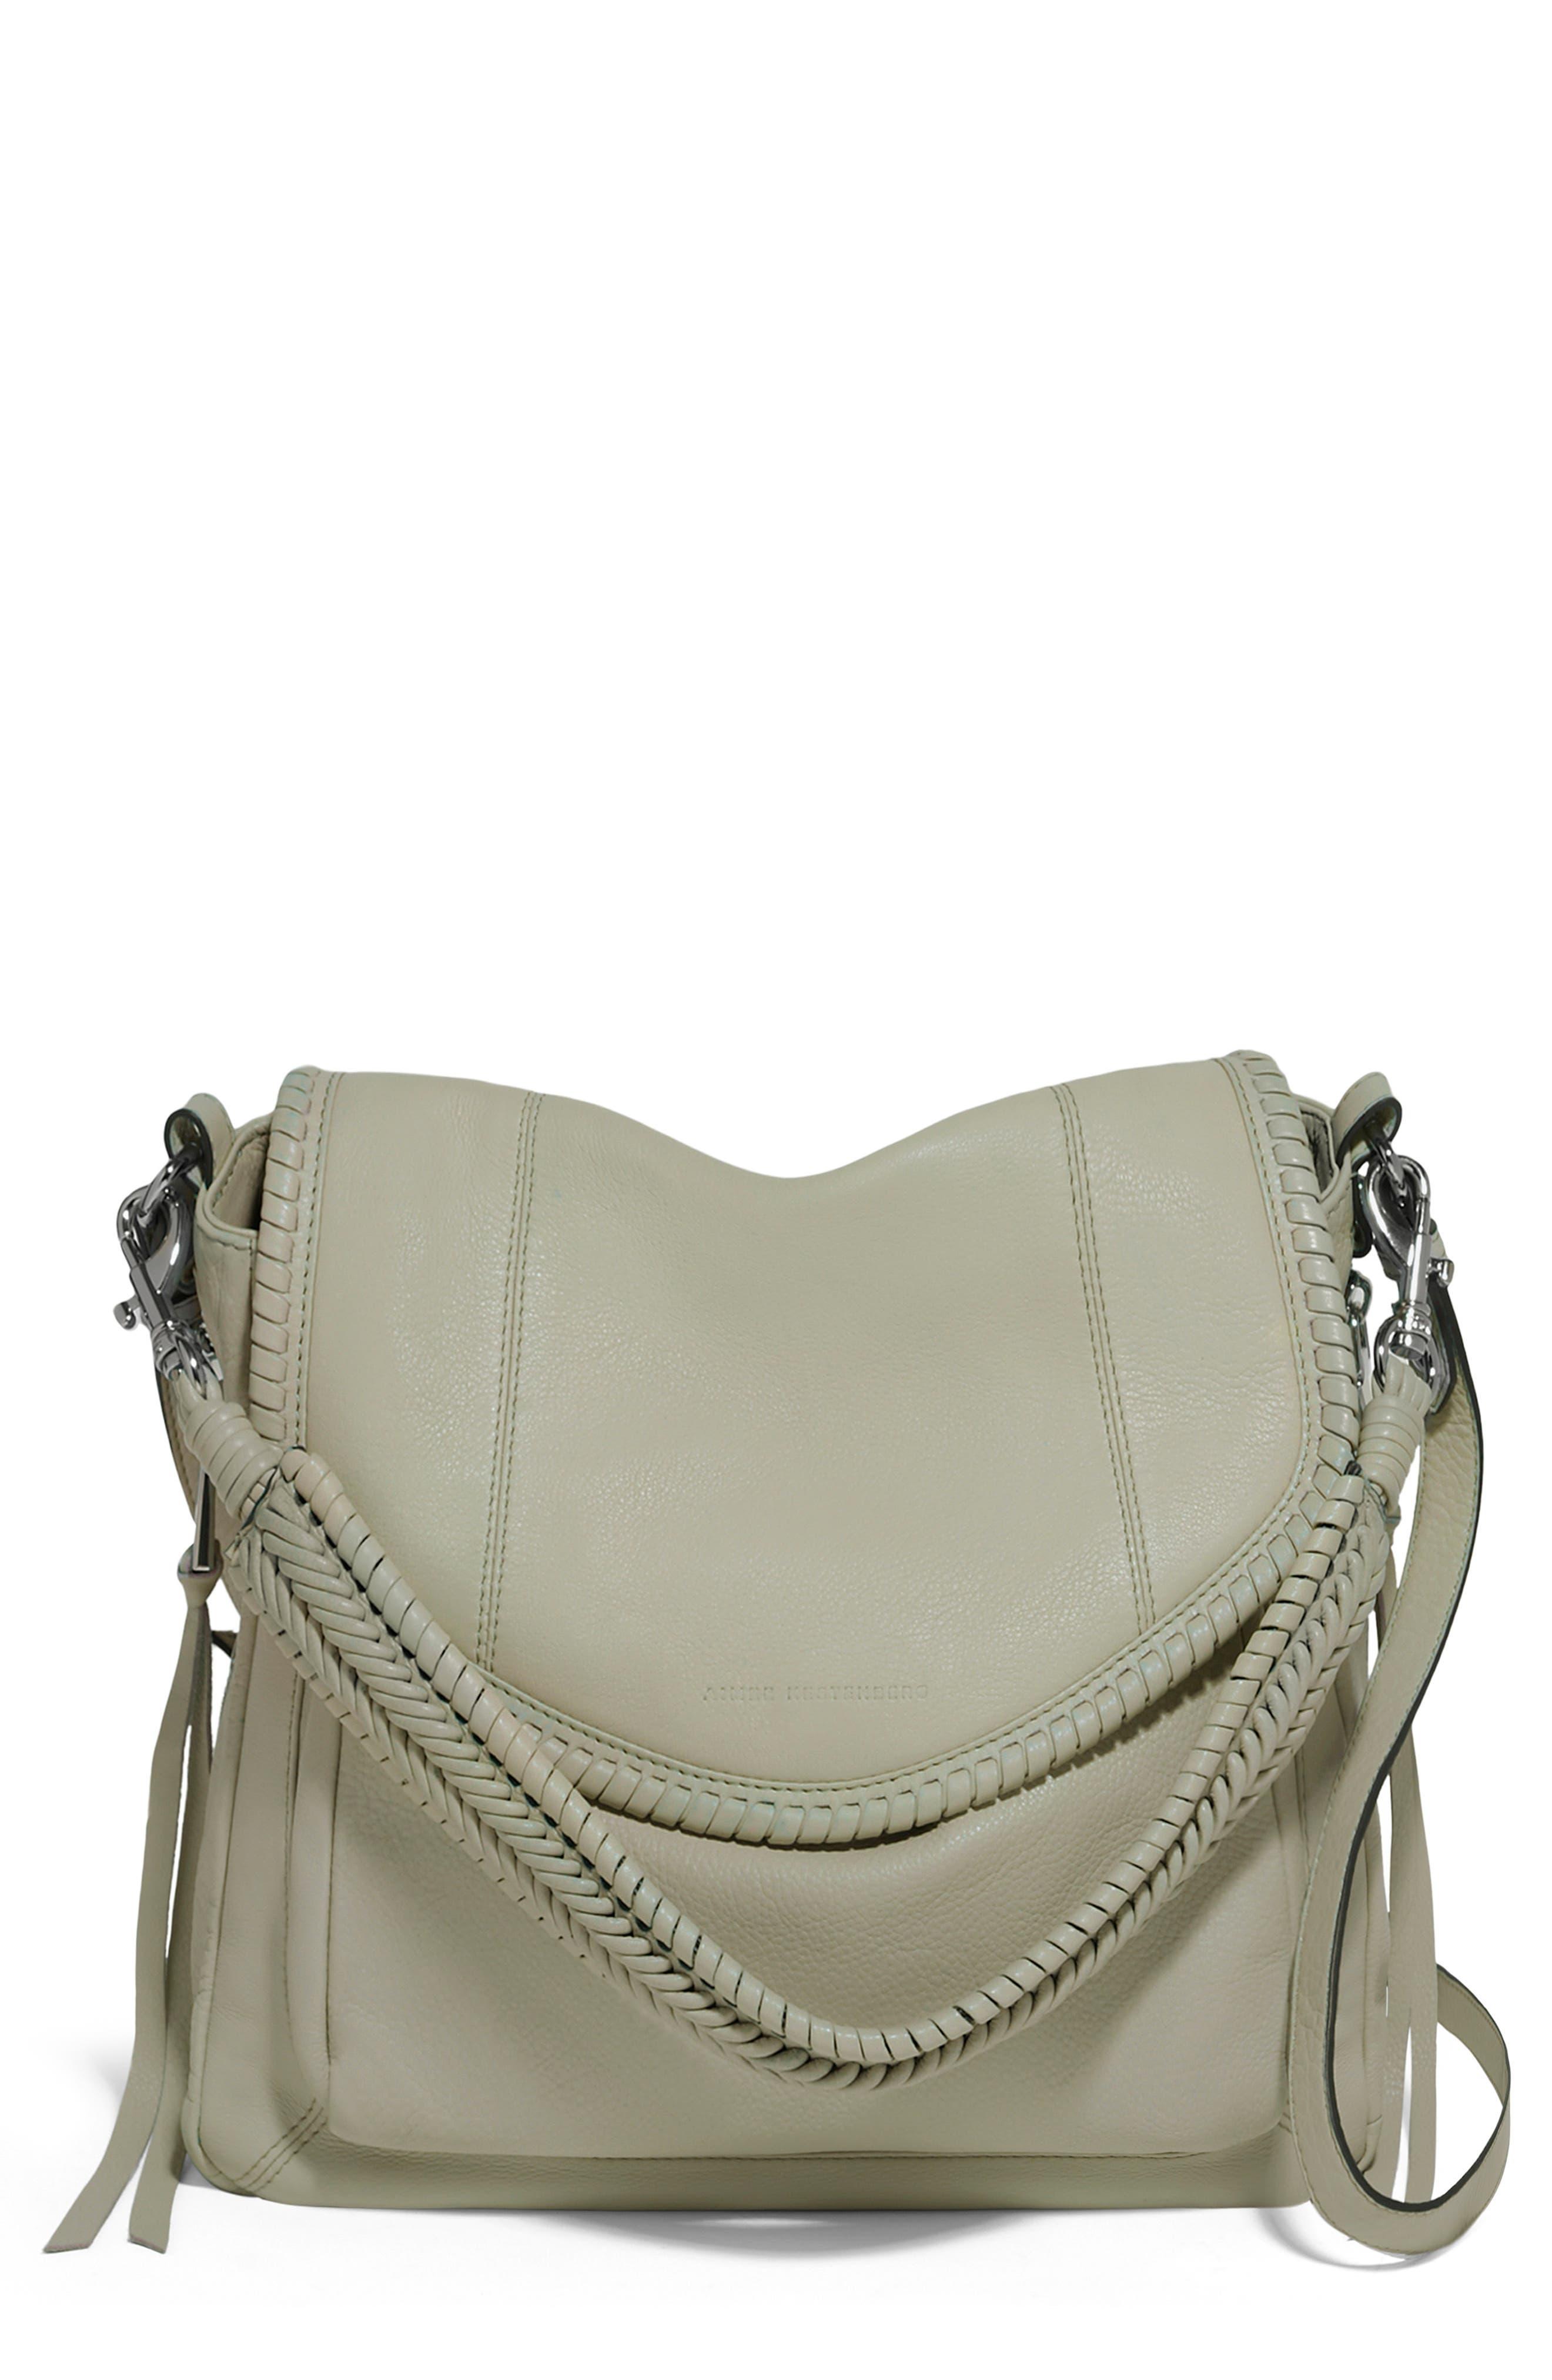 Aimee Kestenberg All For Love Convertible Leather Shoulder Bag in Gray ...